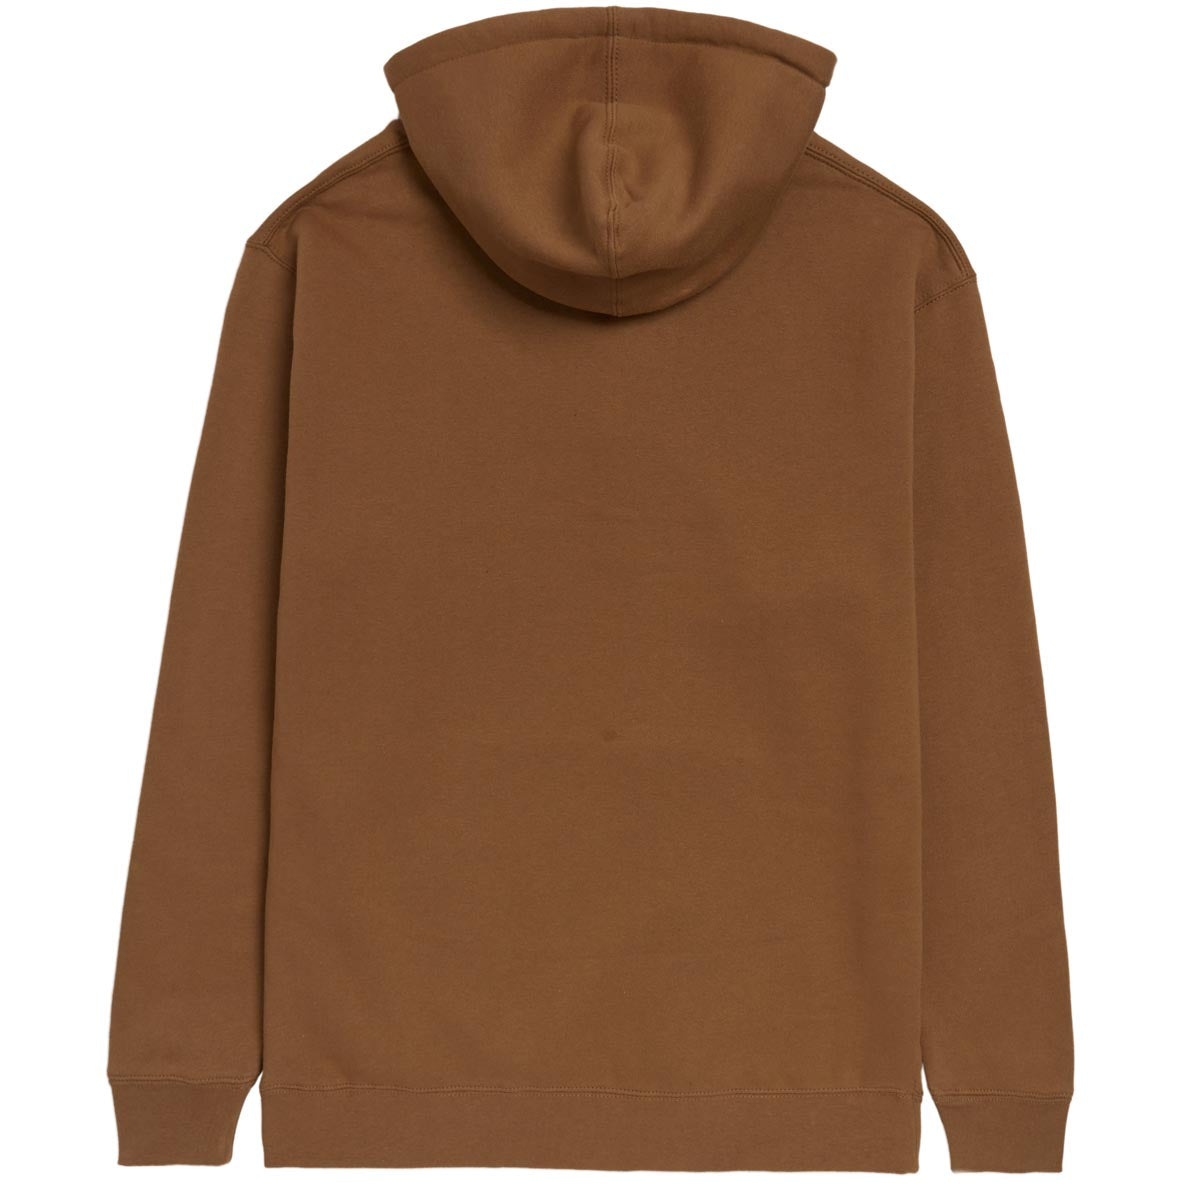 CCS Staple Pullover Hoodie - Camel image 4